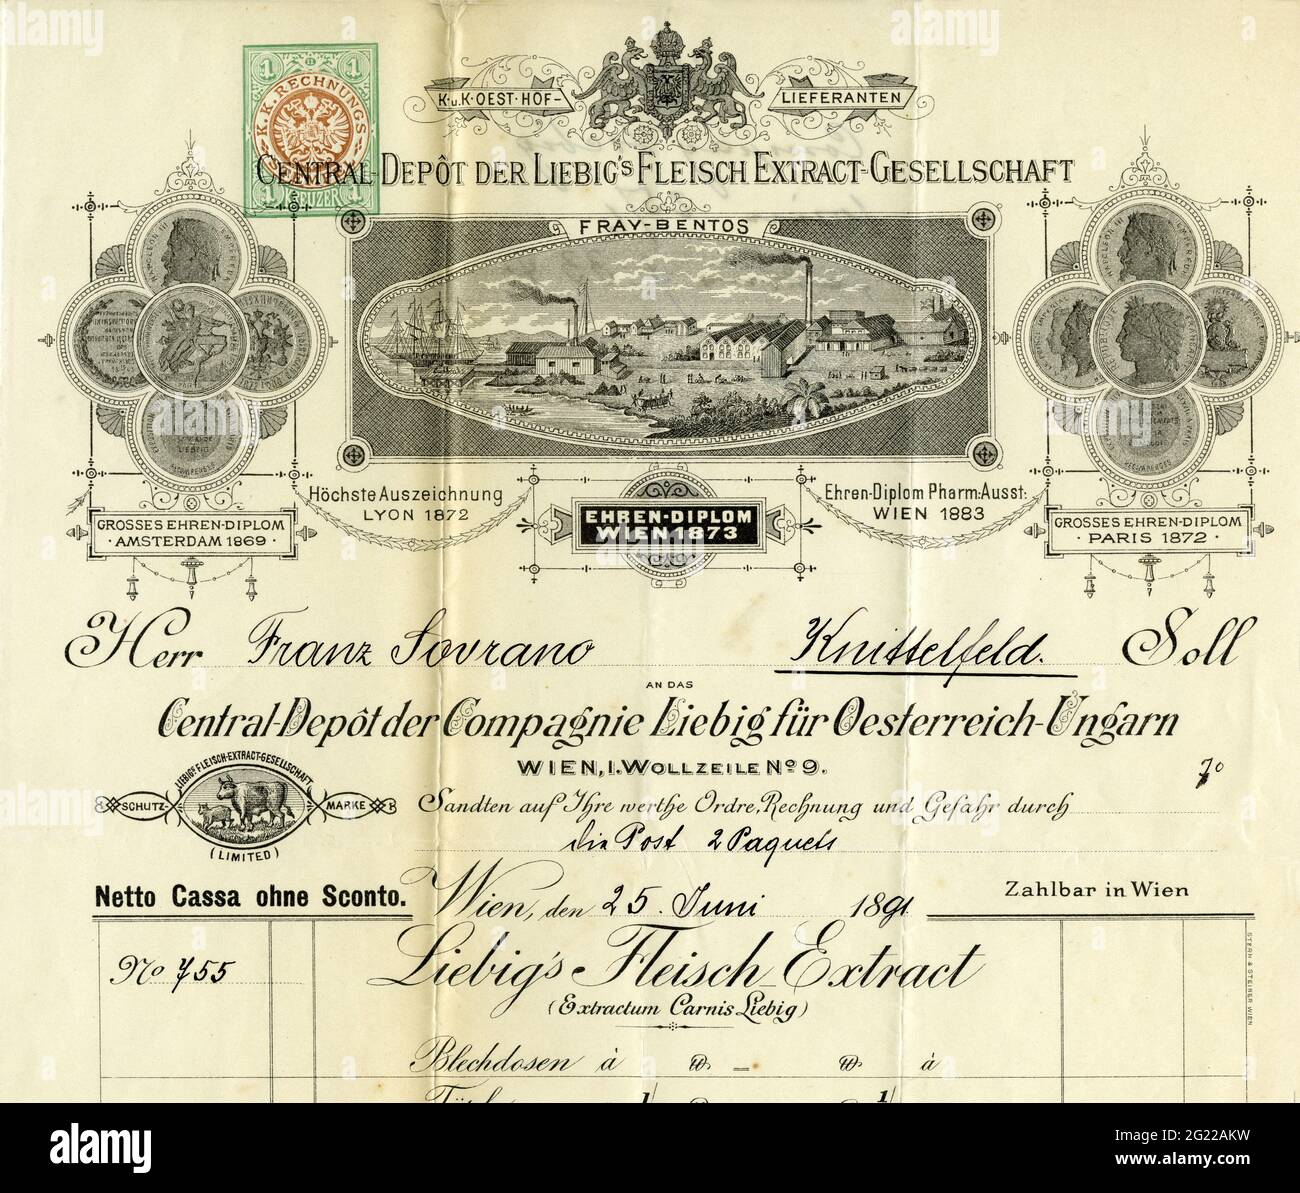 food, Liebig's Fleisch Extract Company, Central Depot, Vienna, k.u.k. royal warrant, invoice, detail, ARTIST'S COPYRIGHT HAS NOT TO BE CLEARED Stock Photo